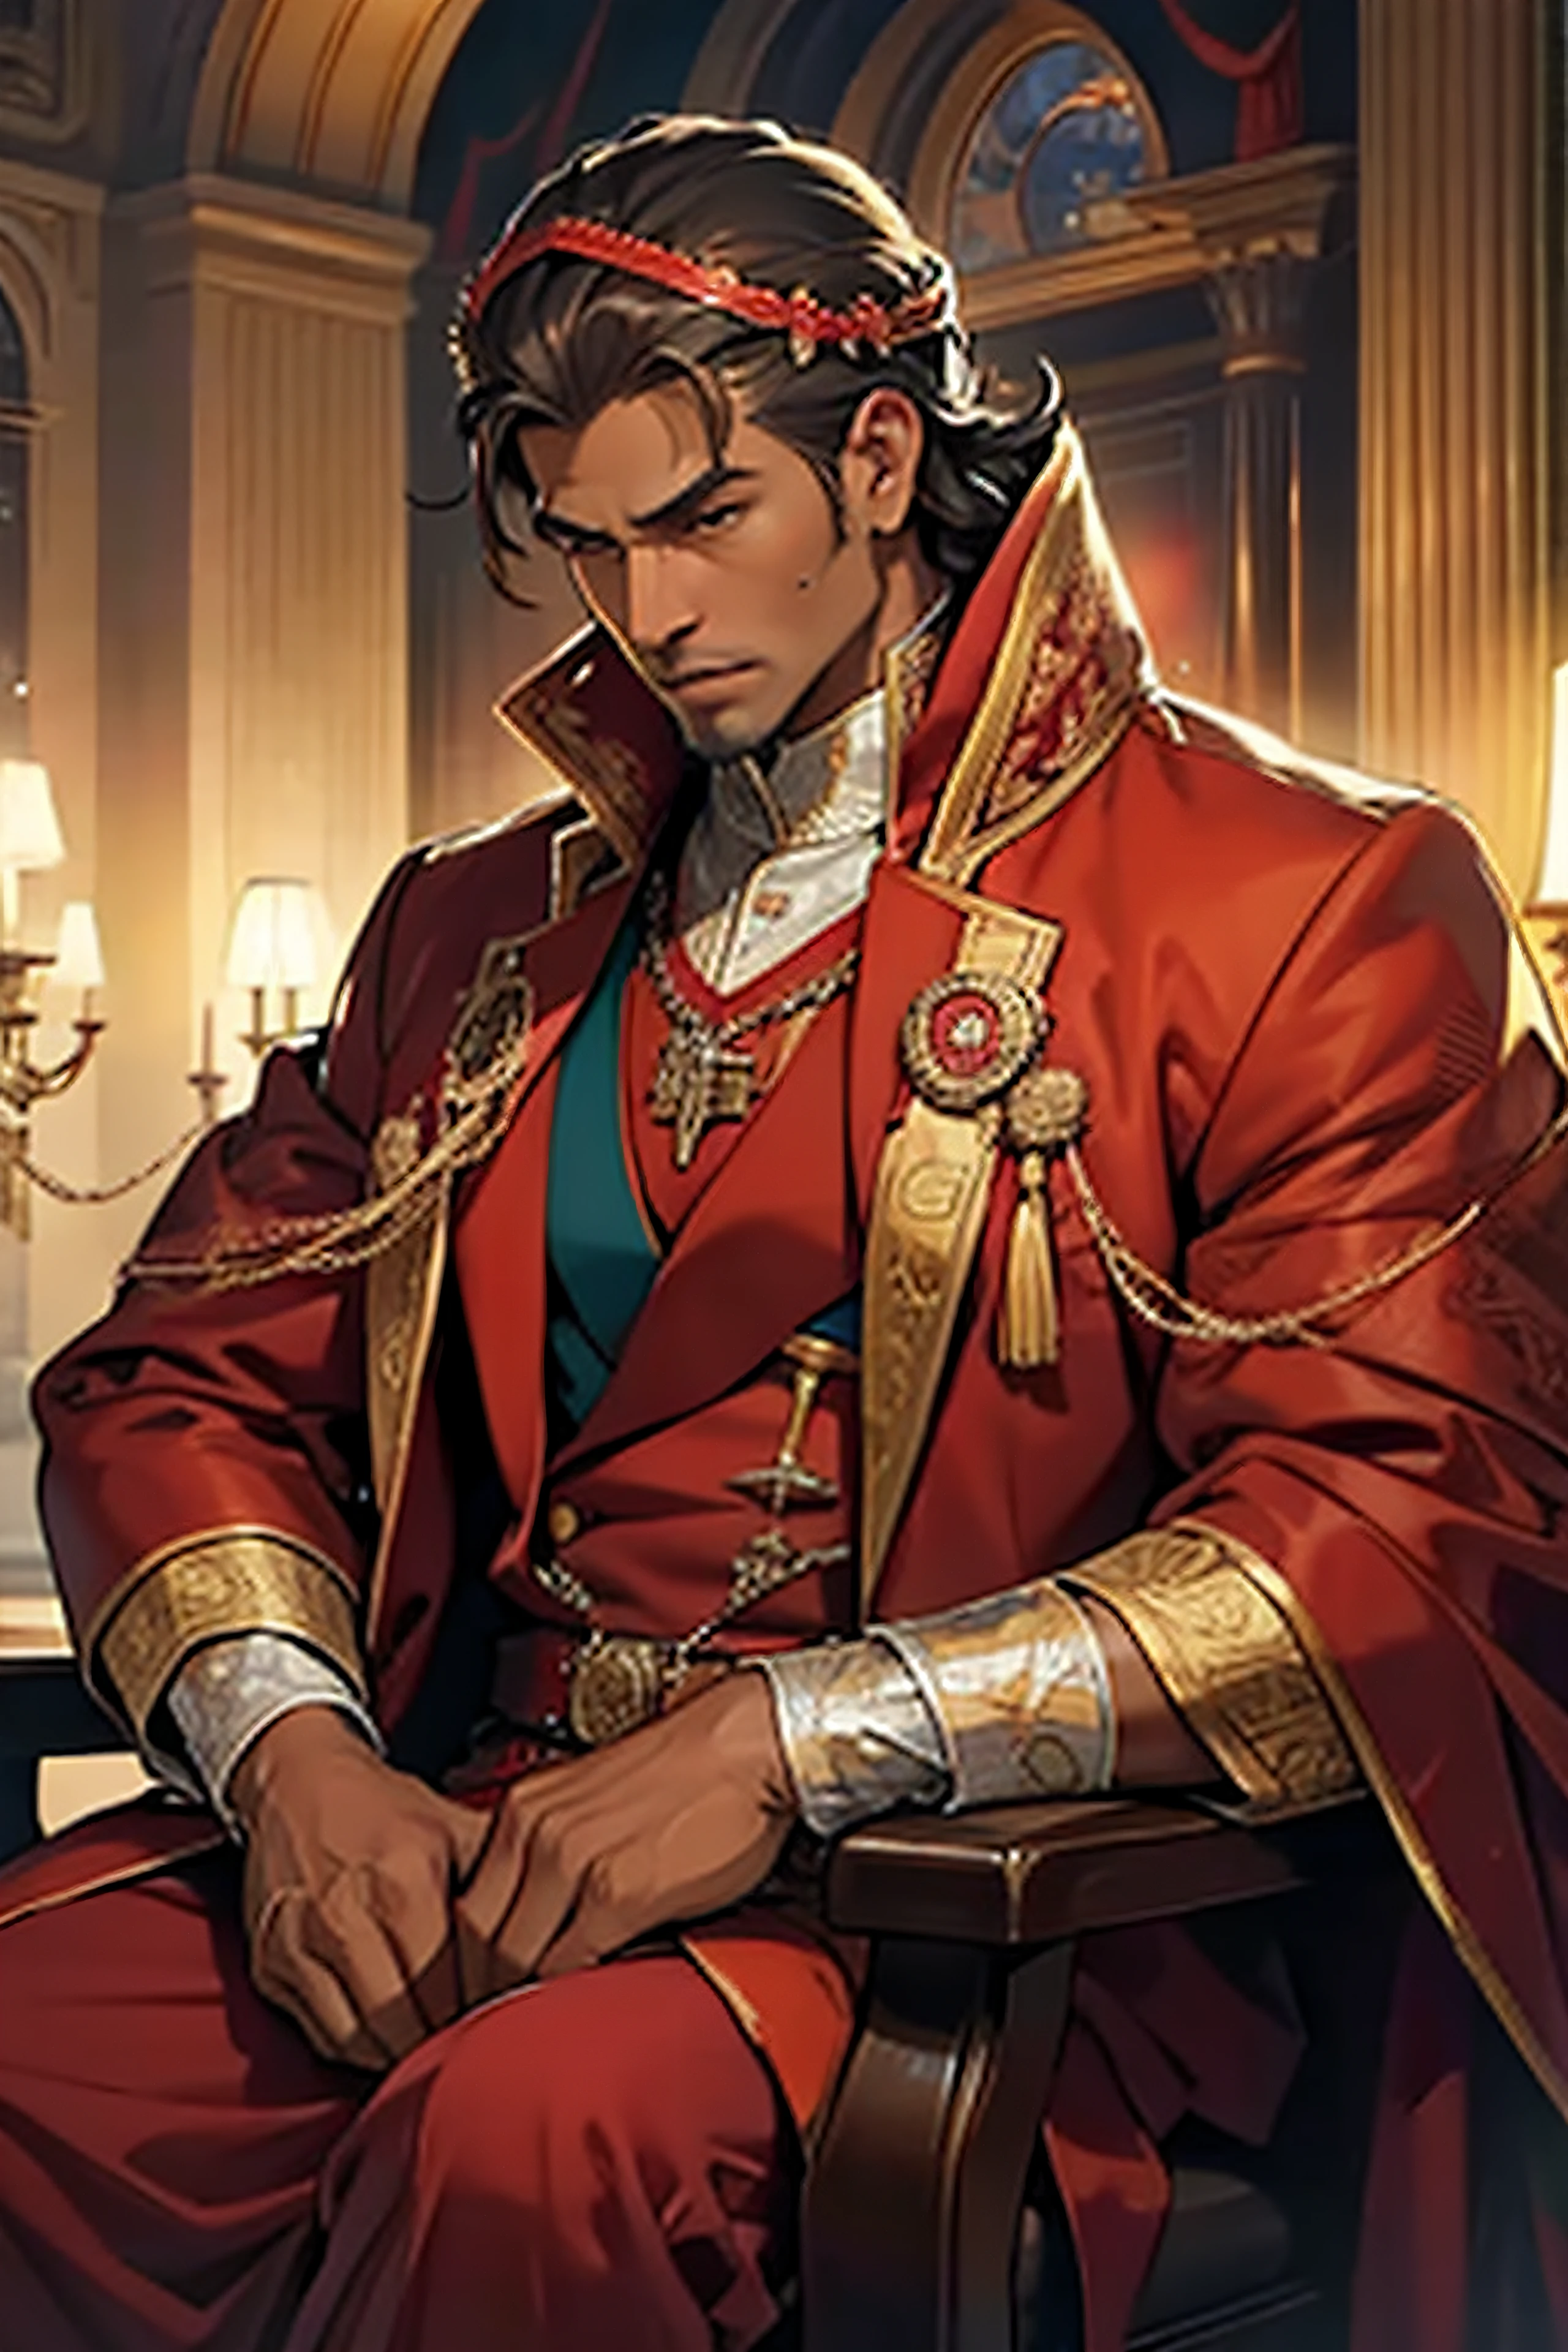 (best quality,realistic),a middle-aged BROWN-SKINNED KING, wearing elegant red clothing, humble crown, mature, focused, strong, muscular face prom